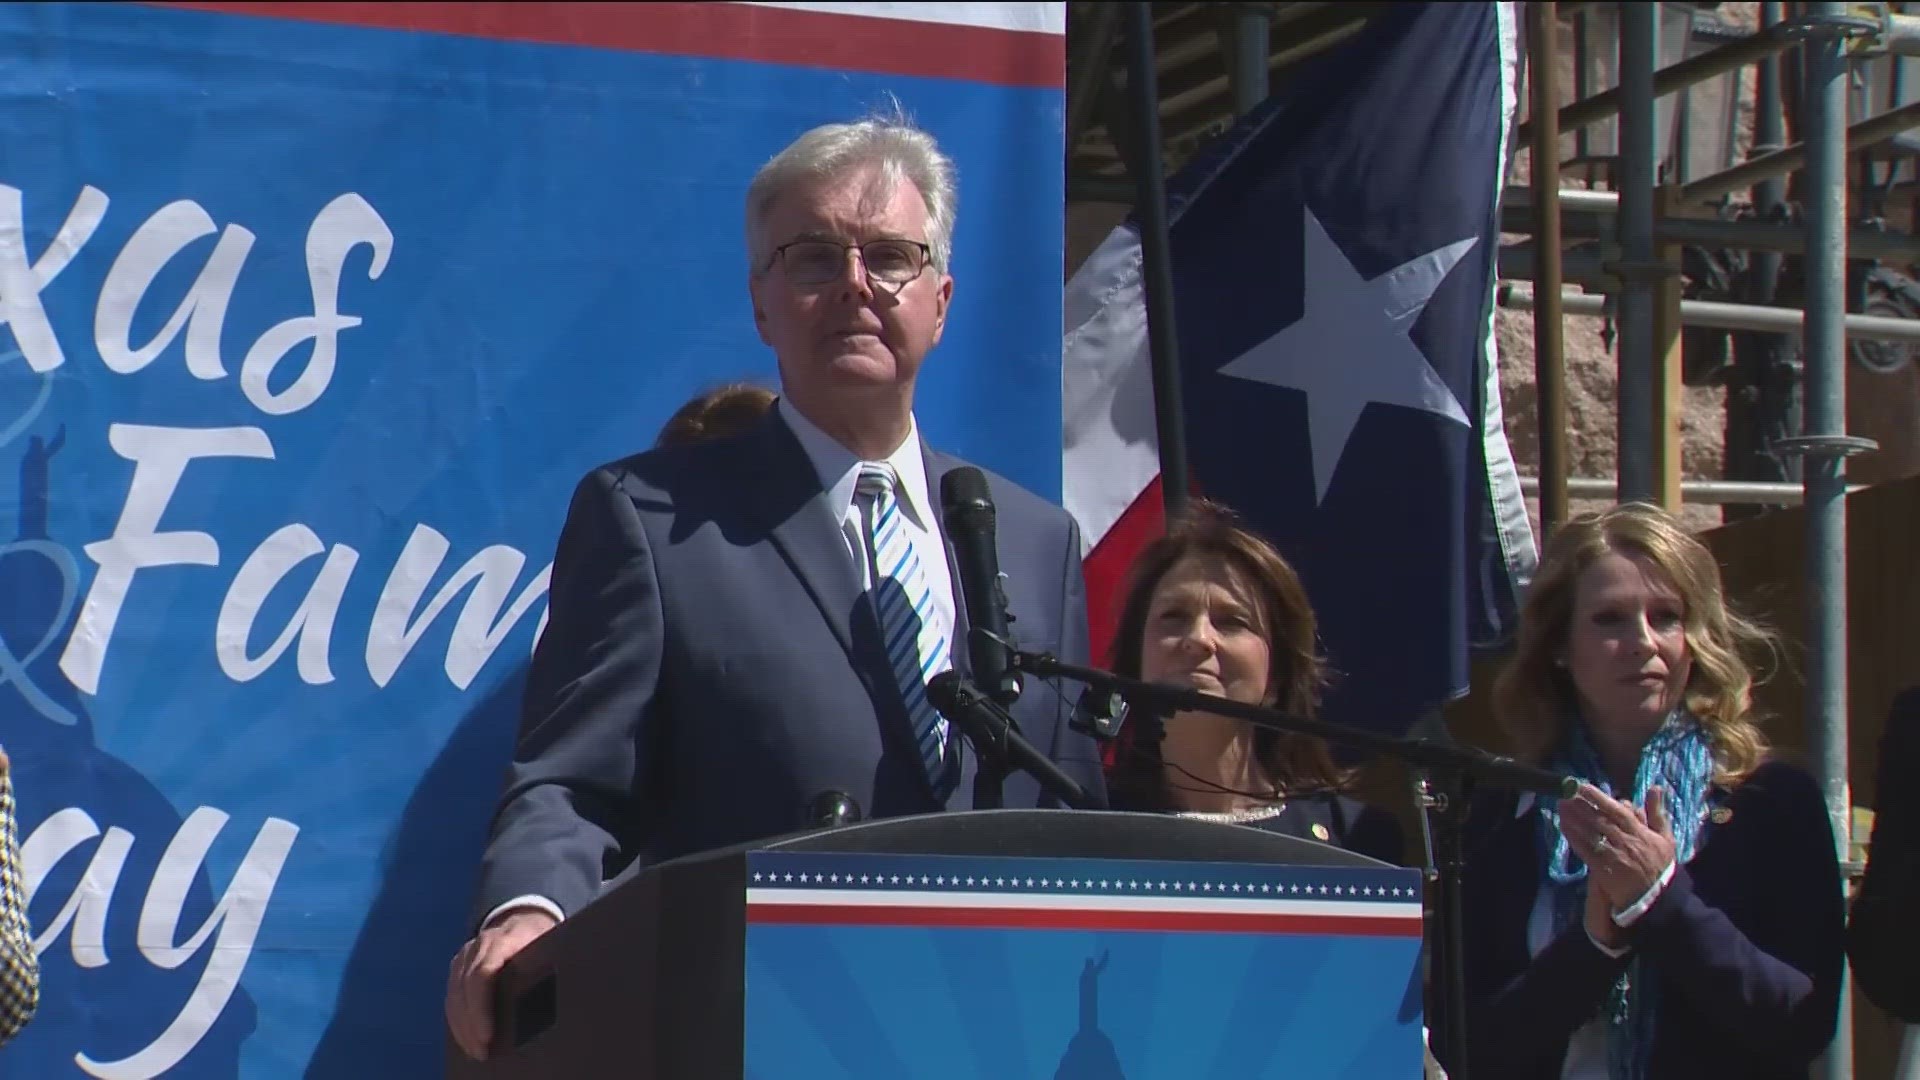 During "Texas Faith and Family Day" at the Texas State Capitol, the first piece of legislation that would directly affect members of the LGBTQ community was heard.